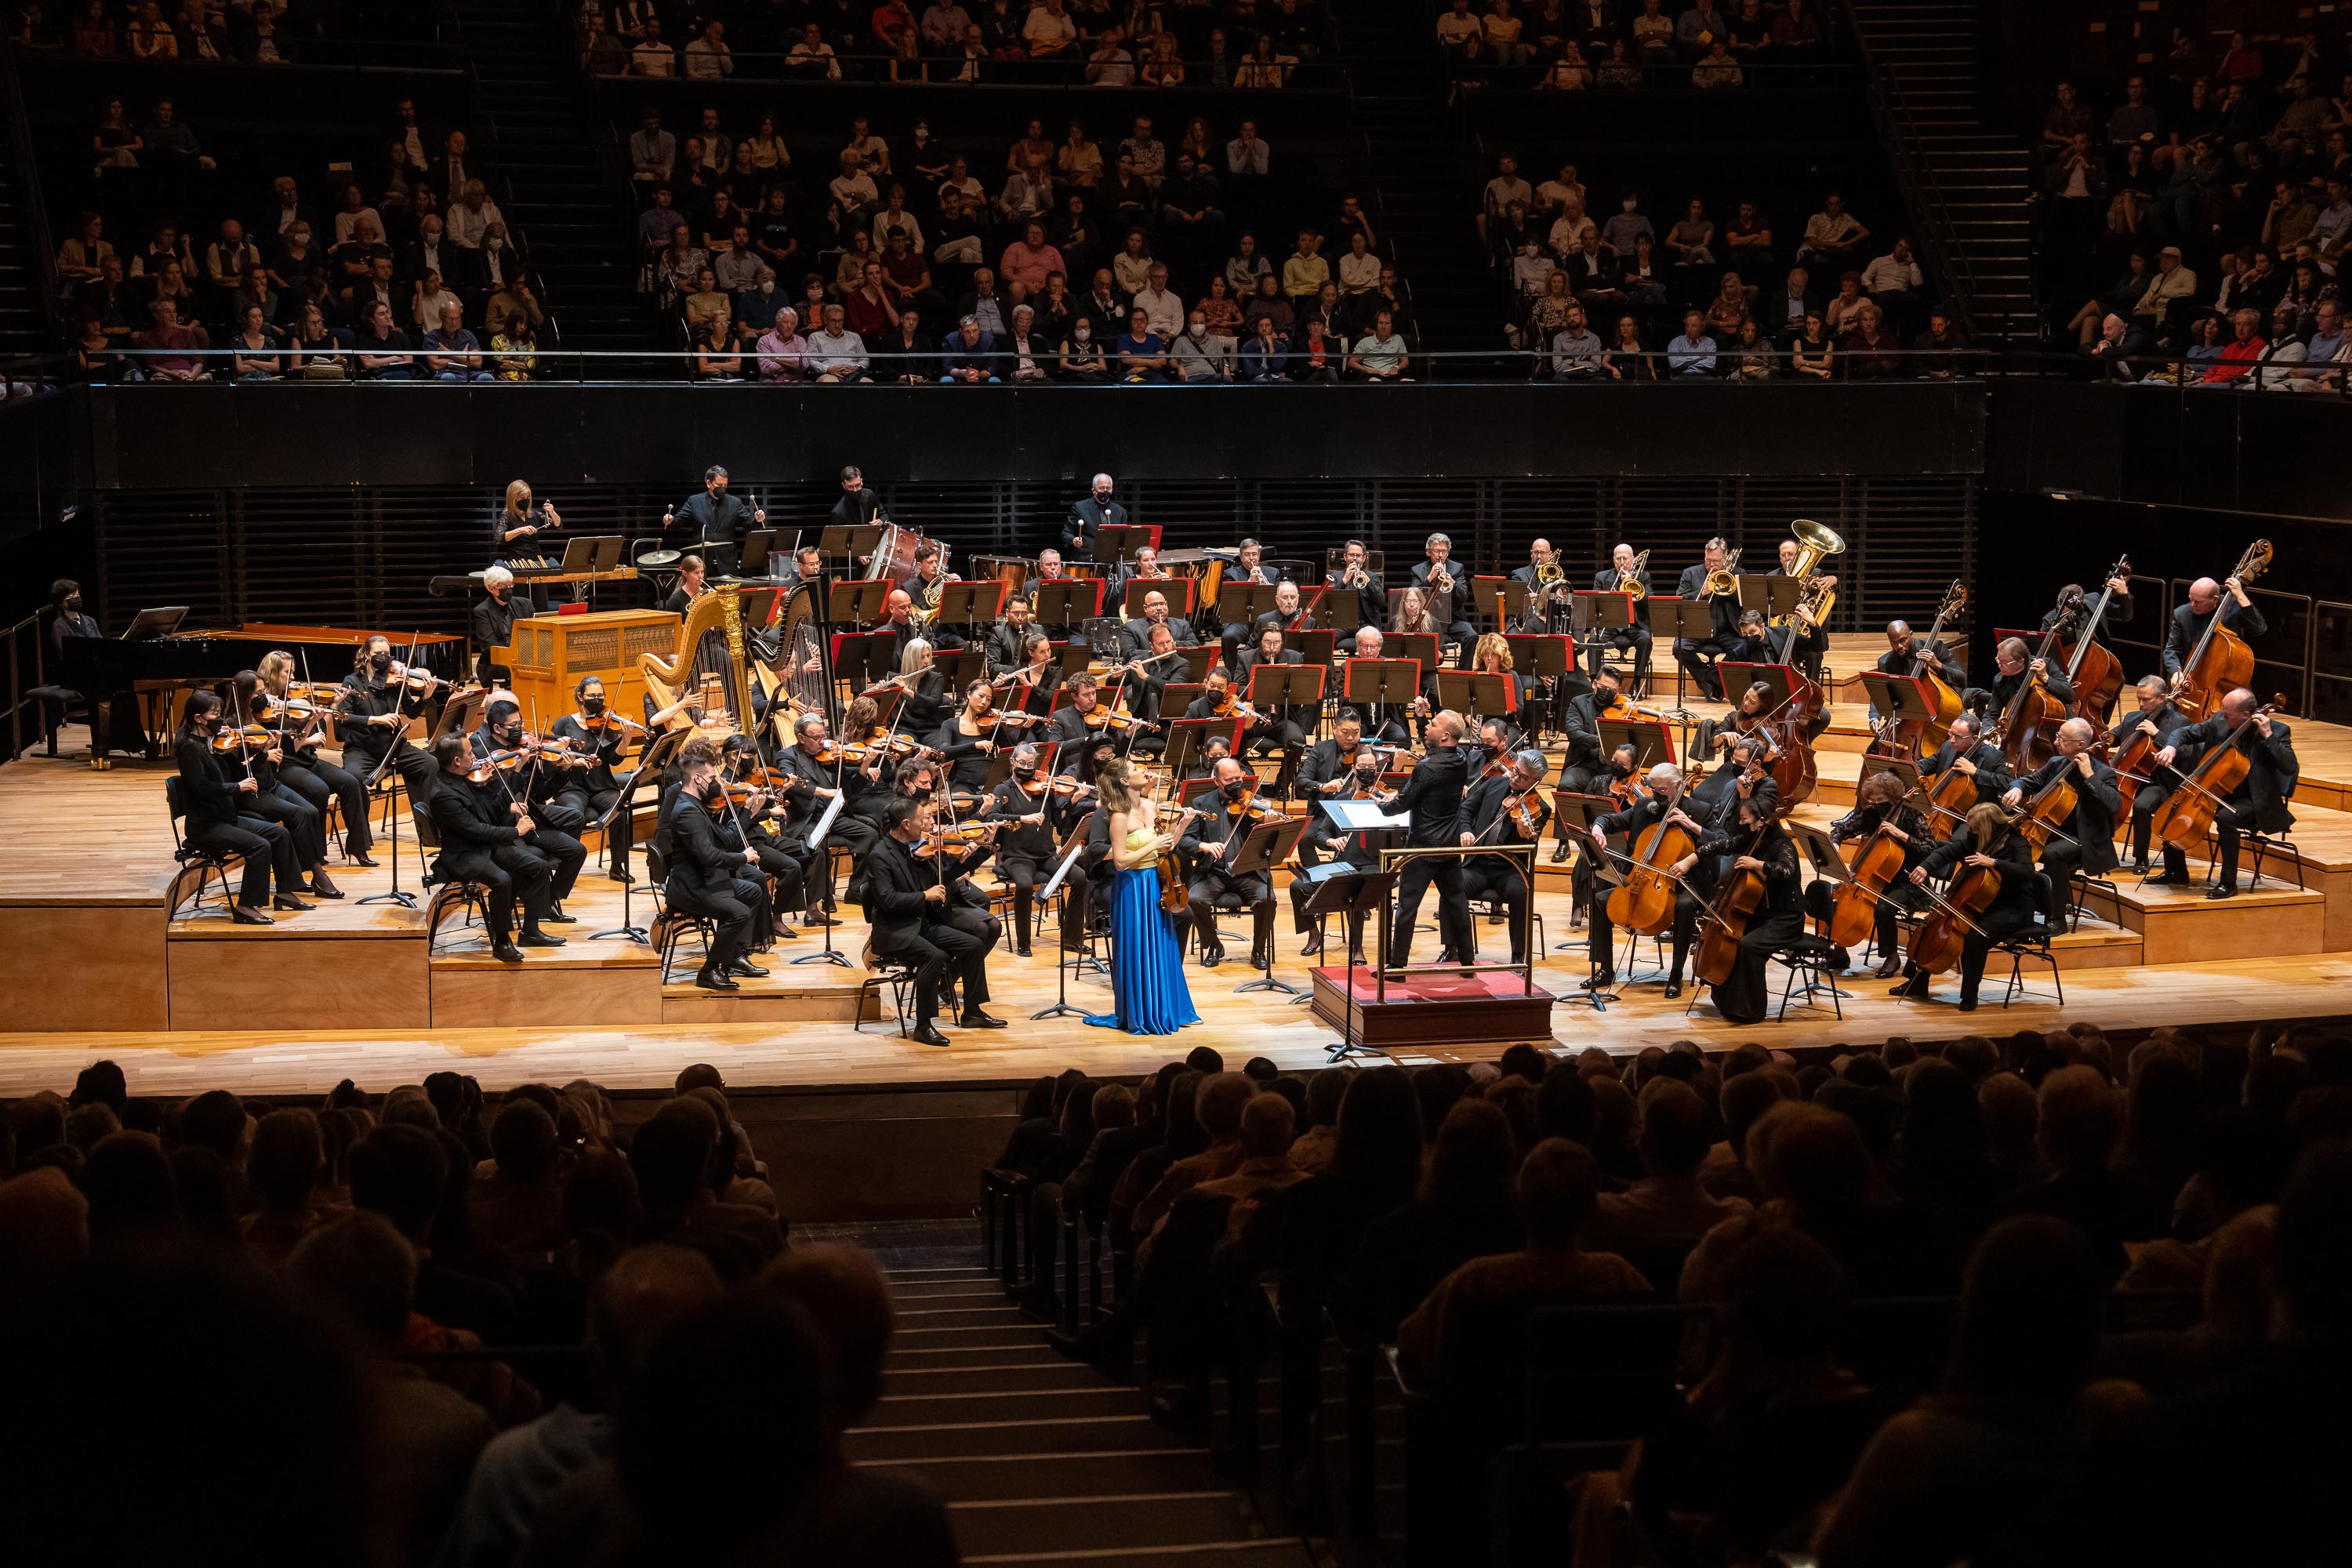 Lisa performed Szymanowski’s First Violin Concerto and Chausson’s Poème for the first half of the concert